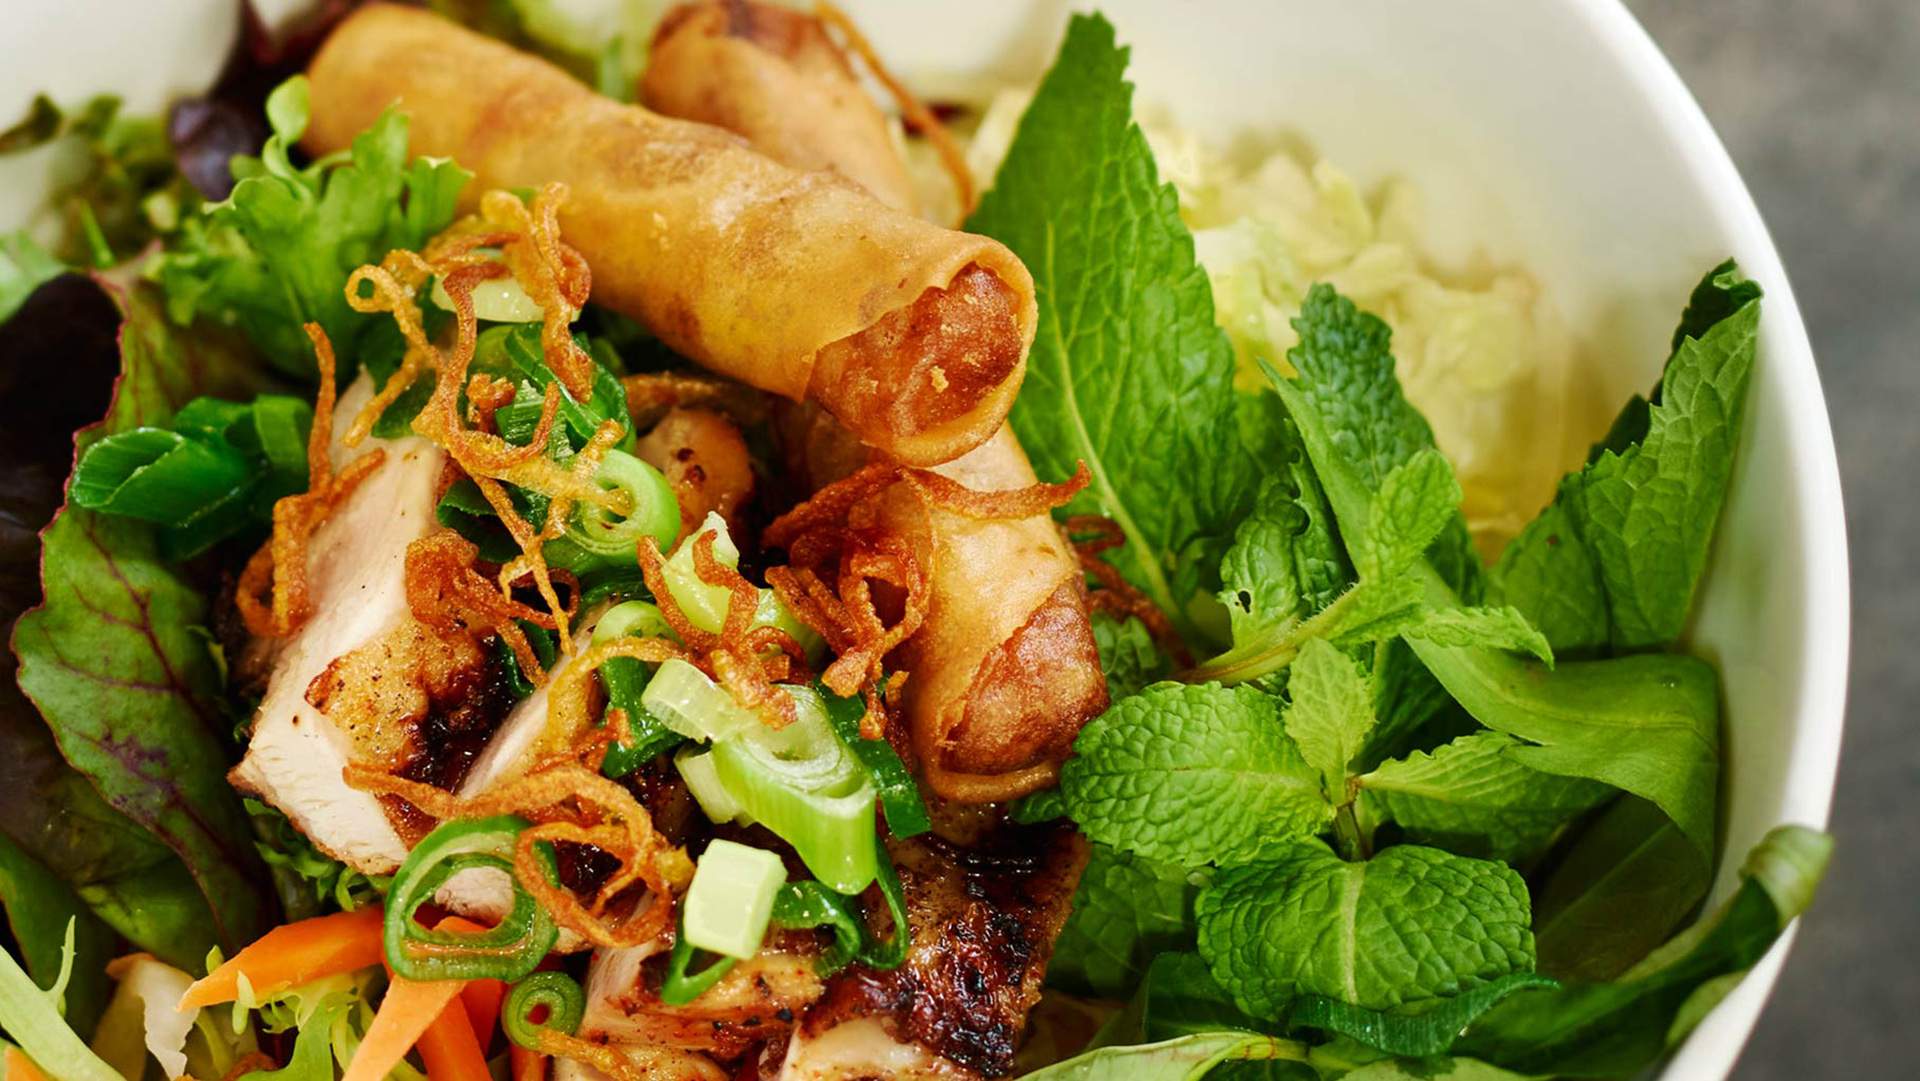 Jerry Mai to Open New High-End Traditional Vietnamese Restaurant Annam